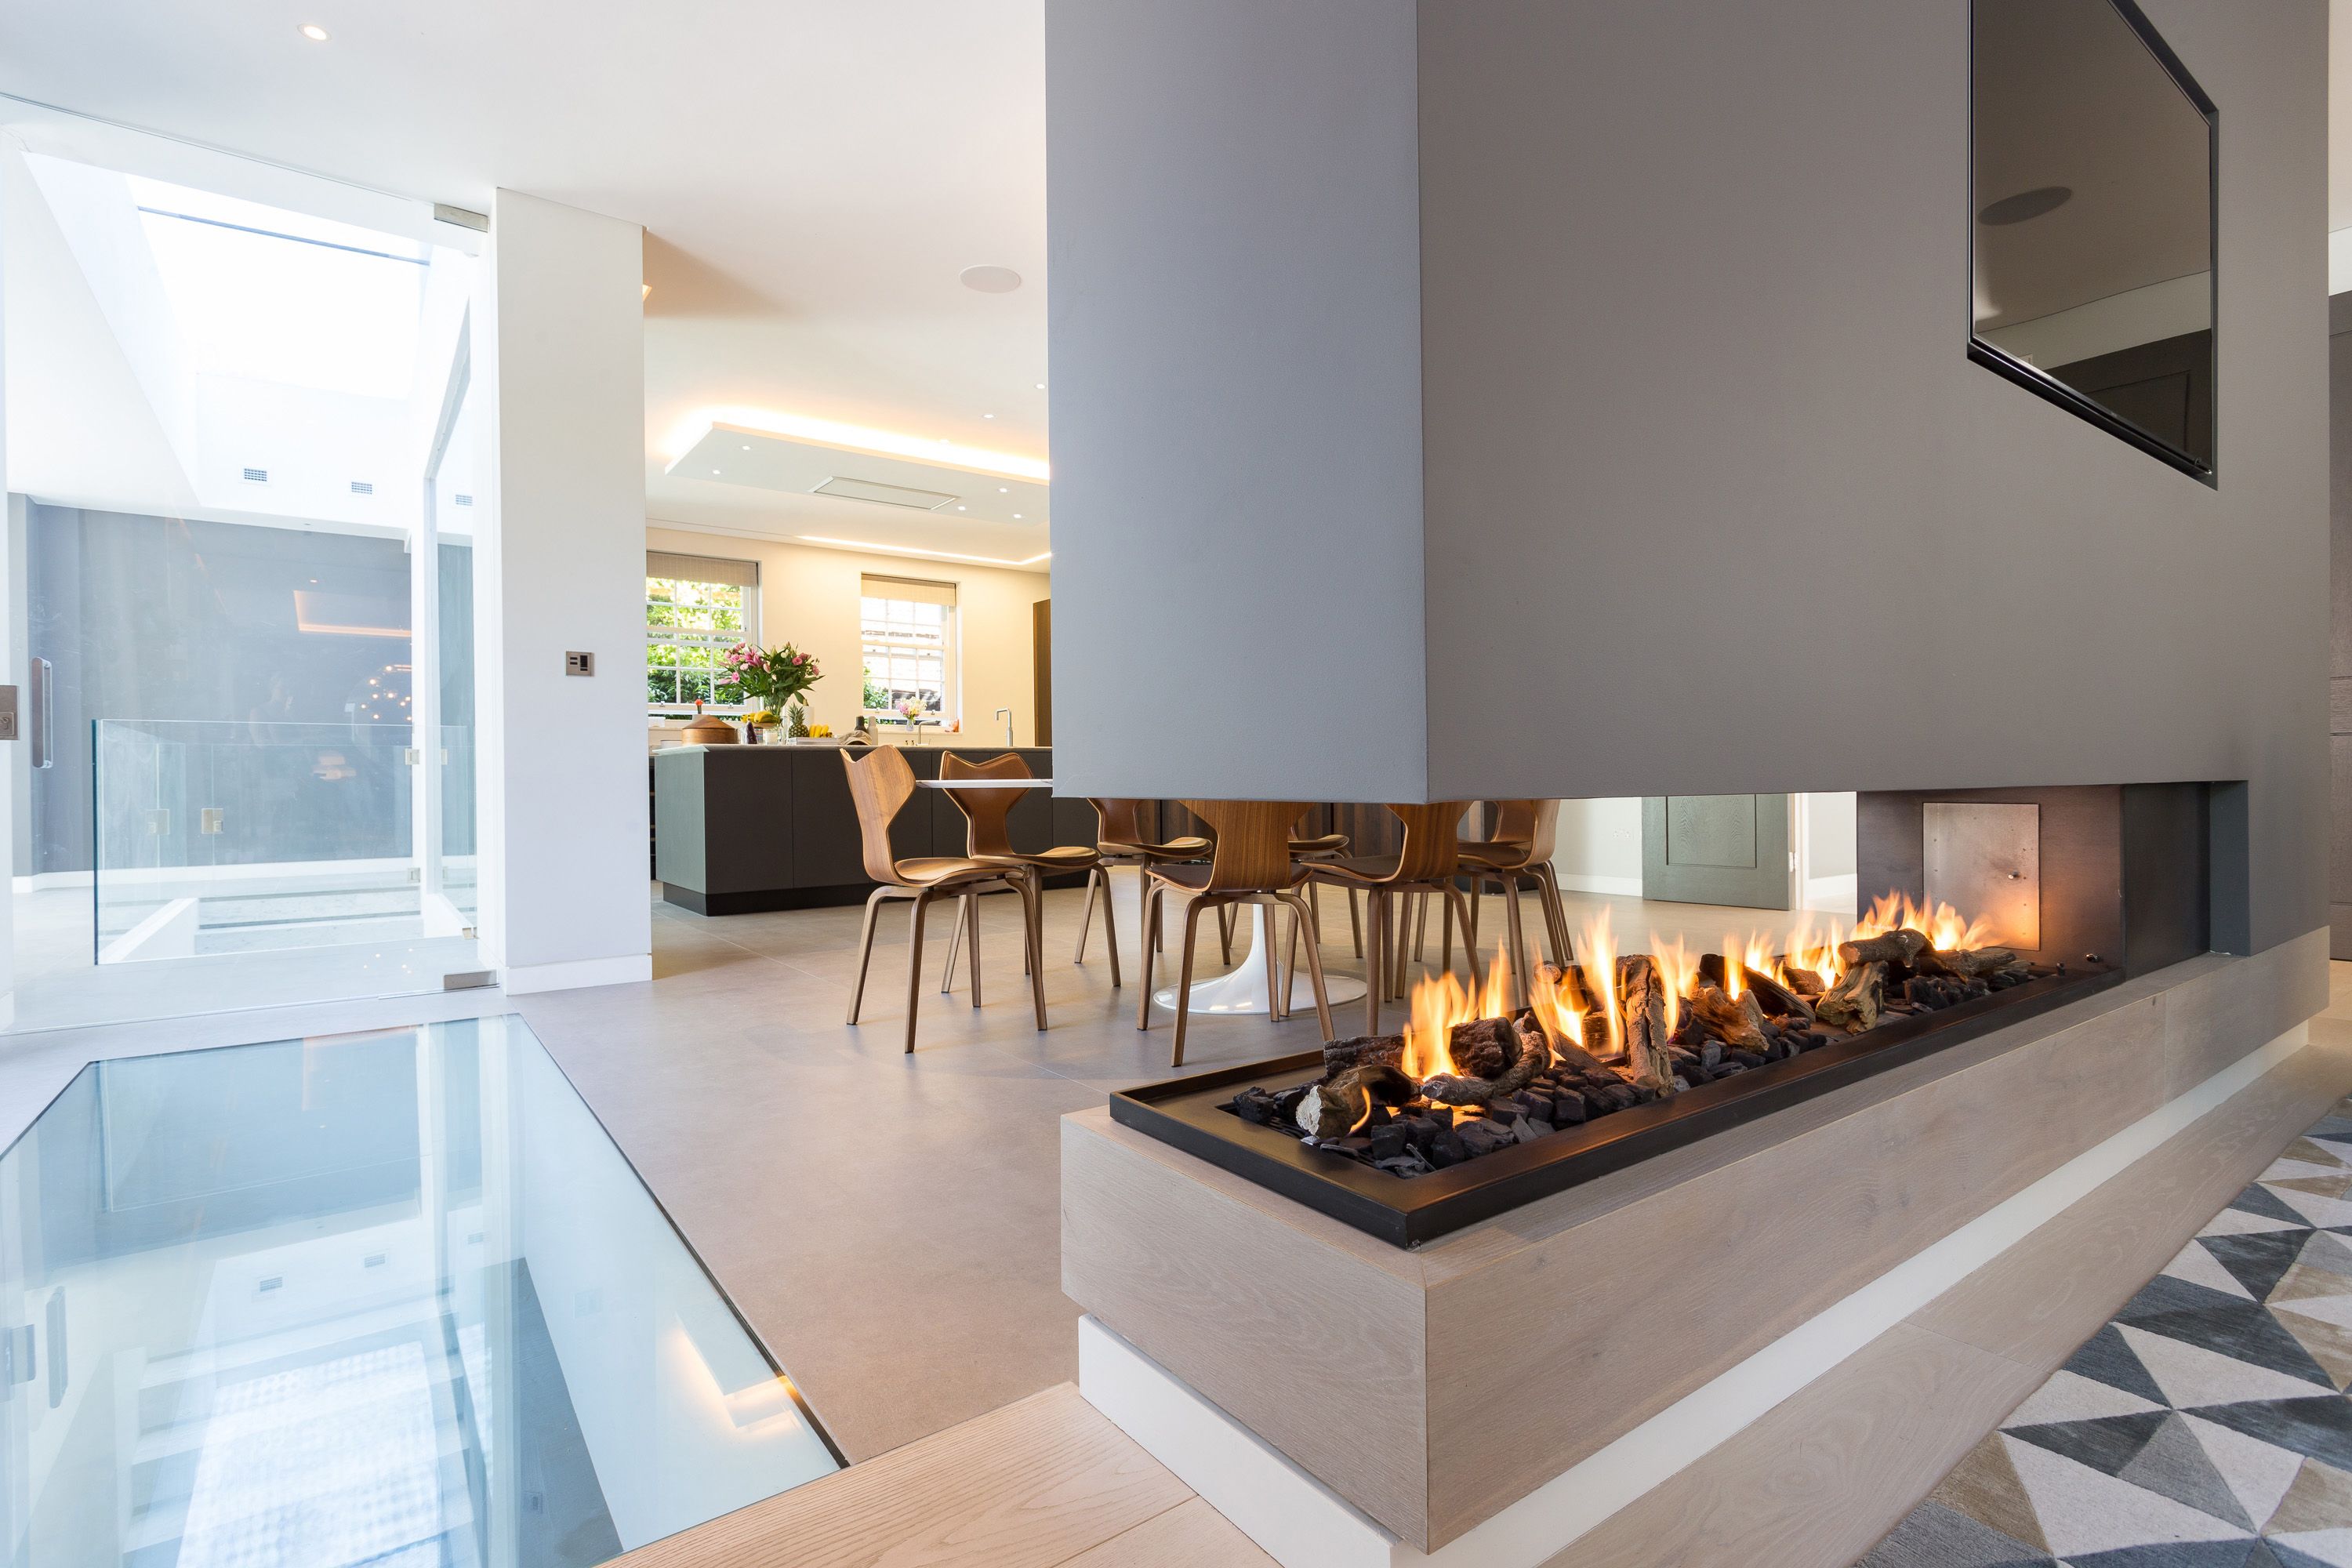 Ultra Thin Gas Fireplaces New This Stunning Three Sided Gas Fireplace forms Part Of A Room